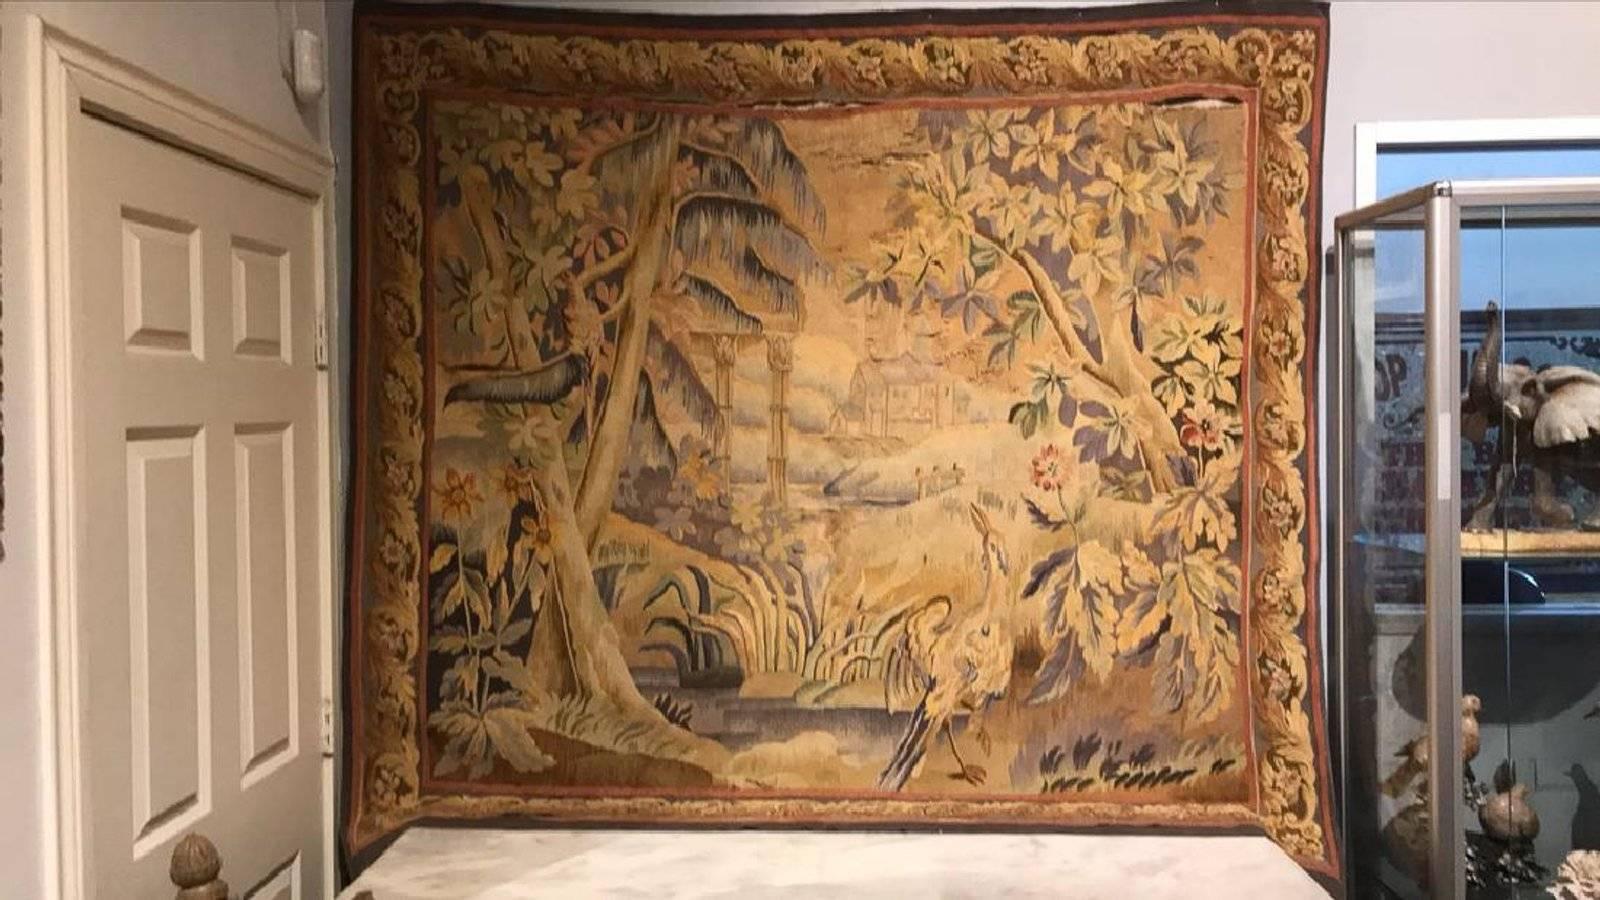 Superb 19th century Flemish handwoven tapestry with a scenic depiction of a flowering landscape with river and exotic birds. A view of a castle can be seen in the distance, 

circa 1870

Good condition but needs some seams re-sewn as shown in